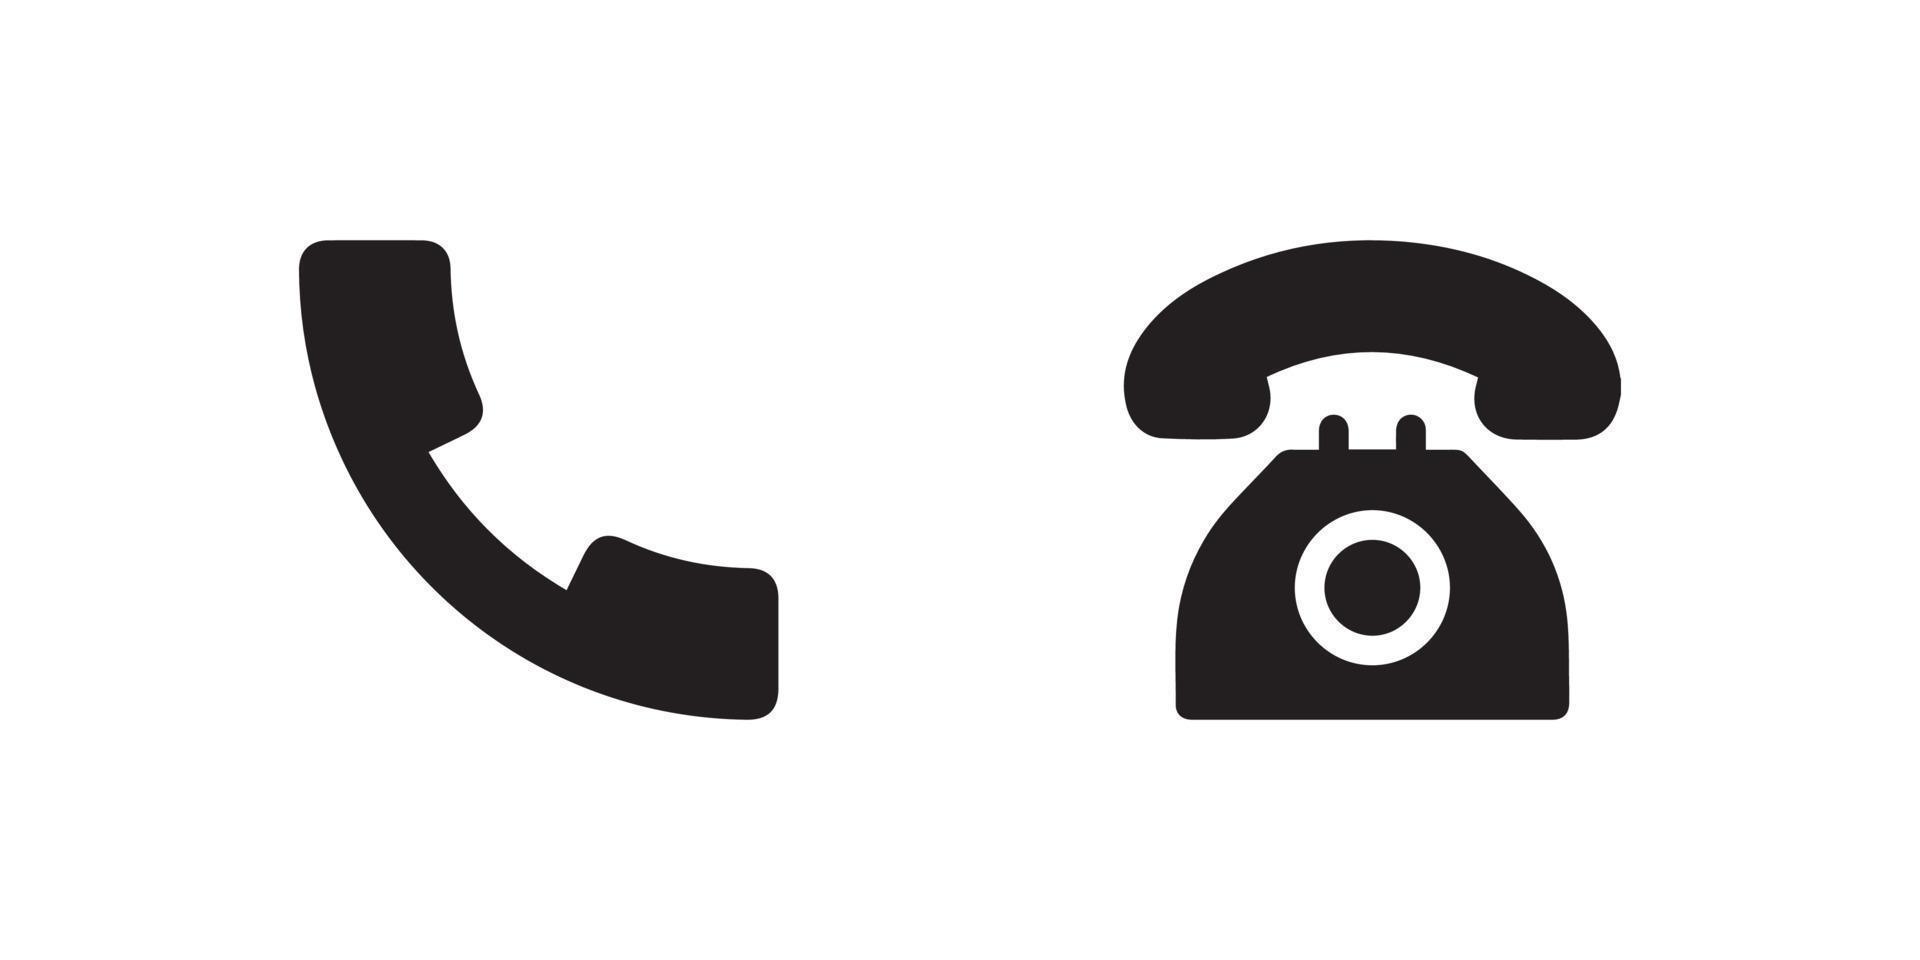 phone icon set, telephone call sign, contact us, vector illustration